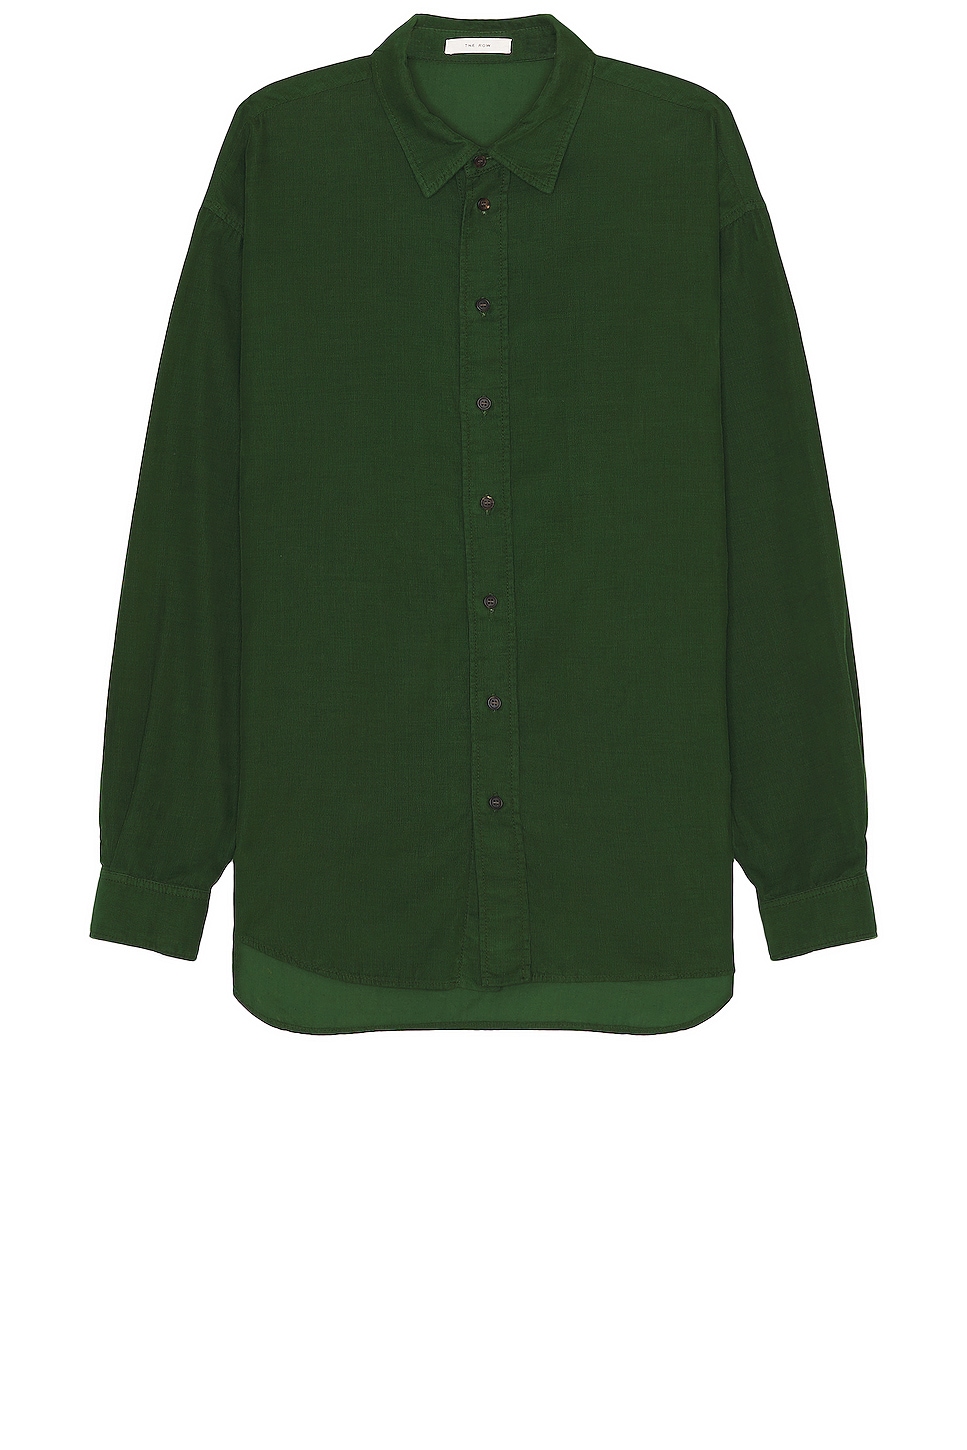 Image 1 of The Row Penn Shirt in Pine Green